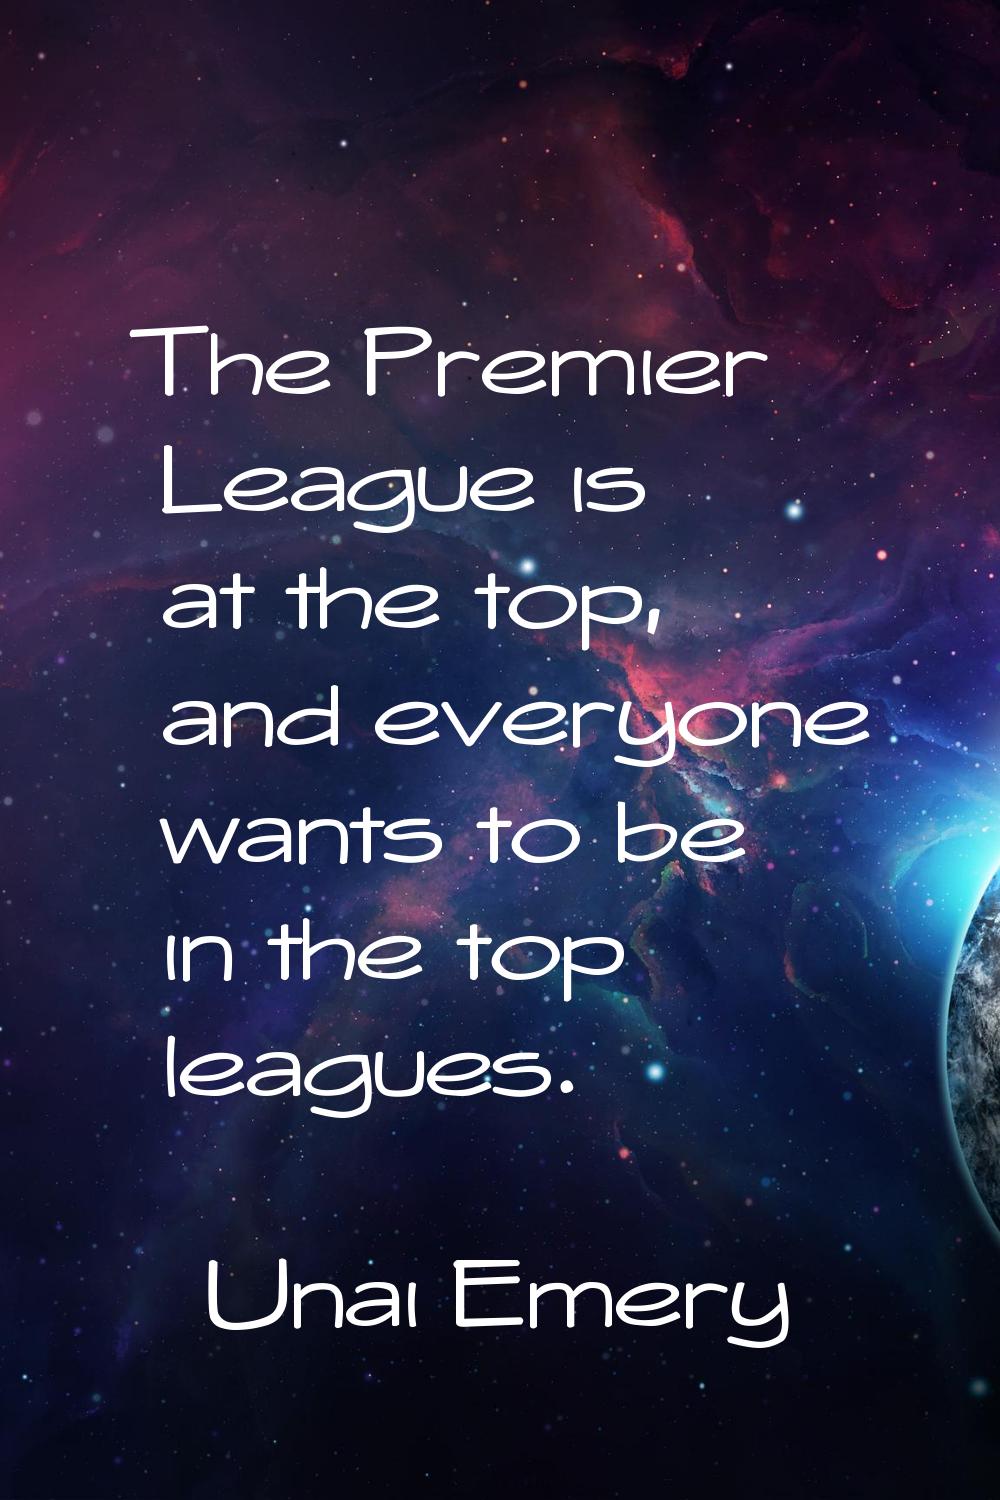 The Premier League is at the top, and everyone wants to be in the top leagues.